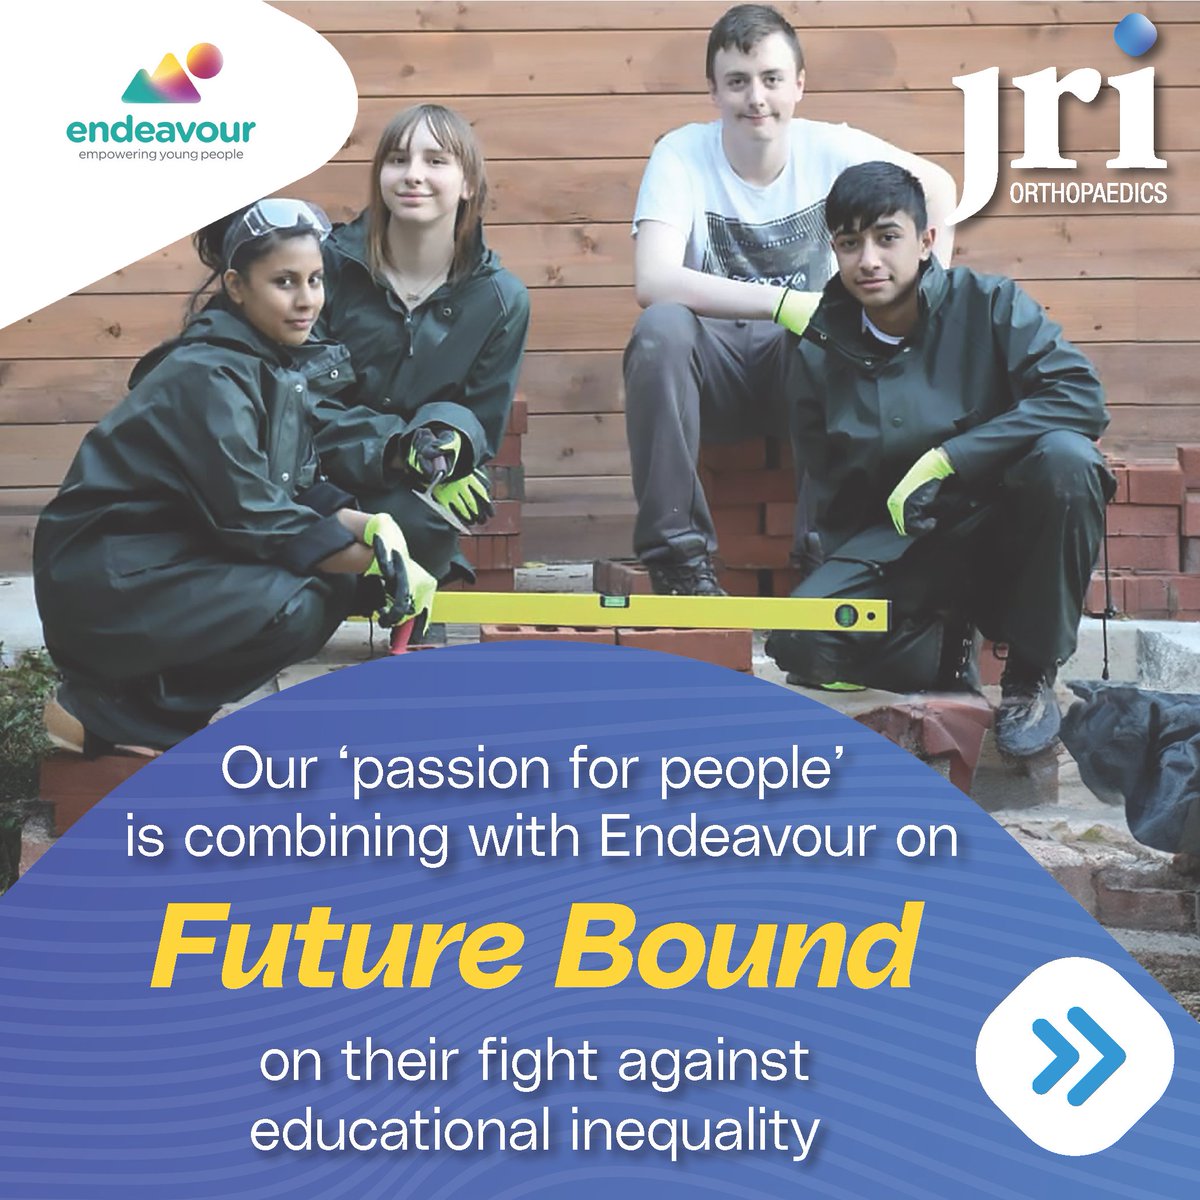 JRI are proud to support @EndeavourSheff a local charity and their work with disadvantaged young people. JRI staff have volunteered to mentor 6 young people as they prepare for their GCSE’s and beyond. Providing individual guidance & support, as well as motivation and confidence